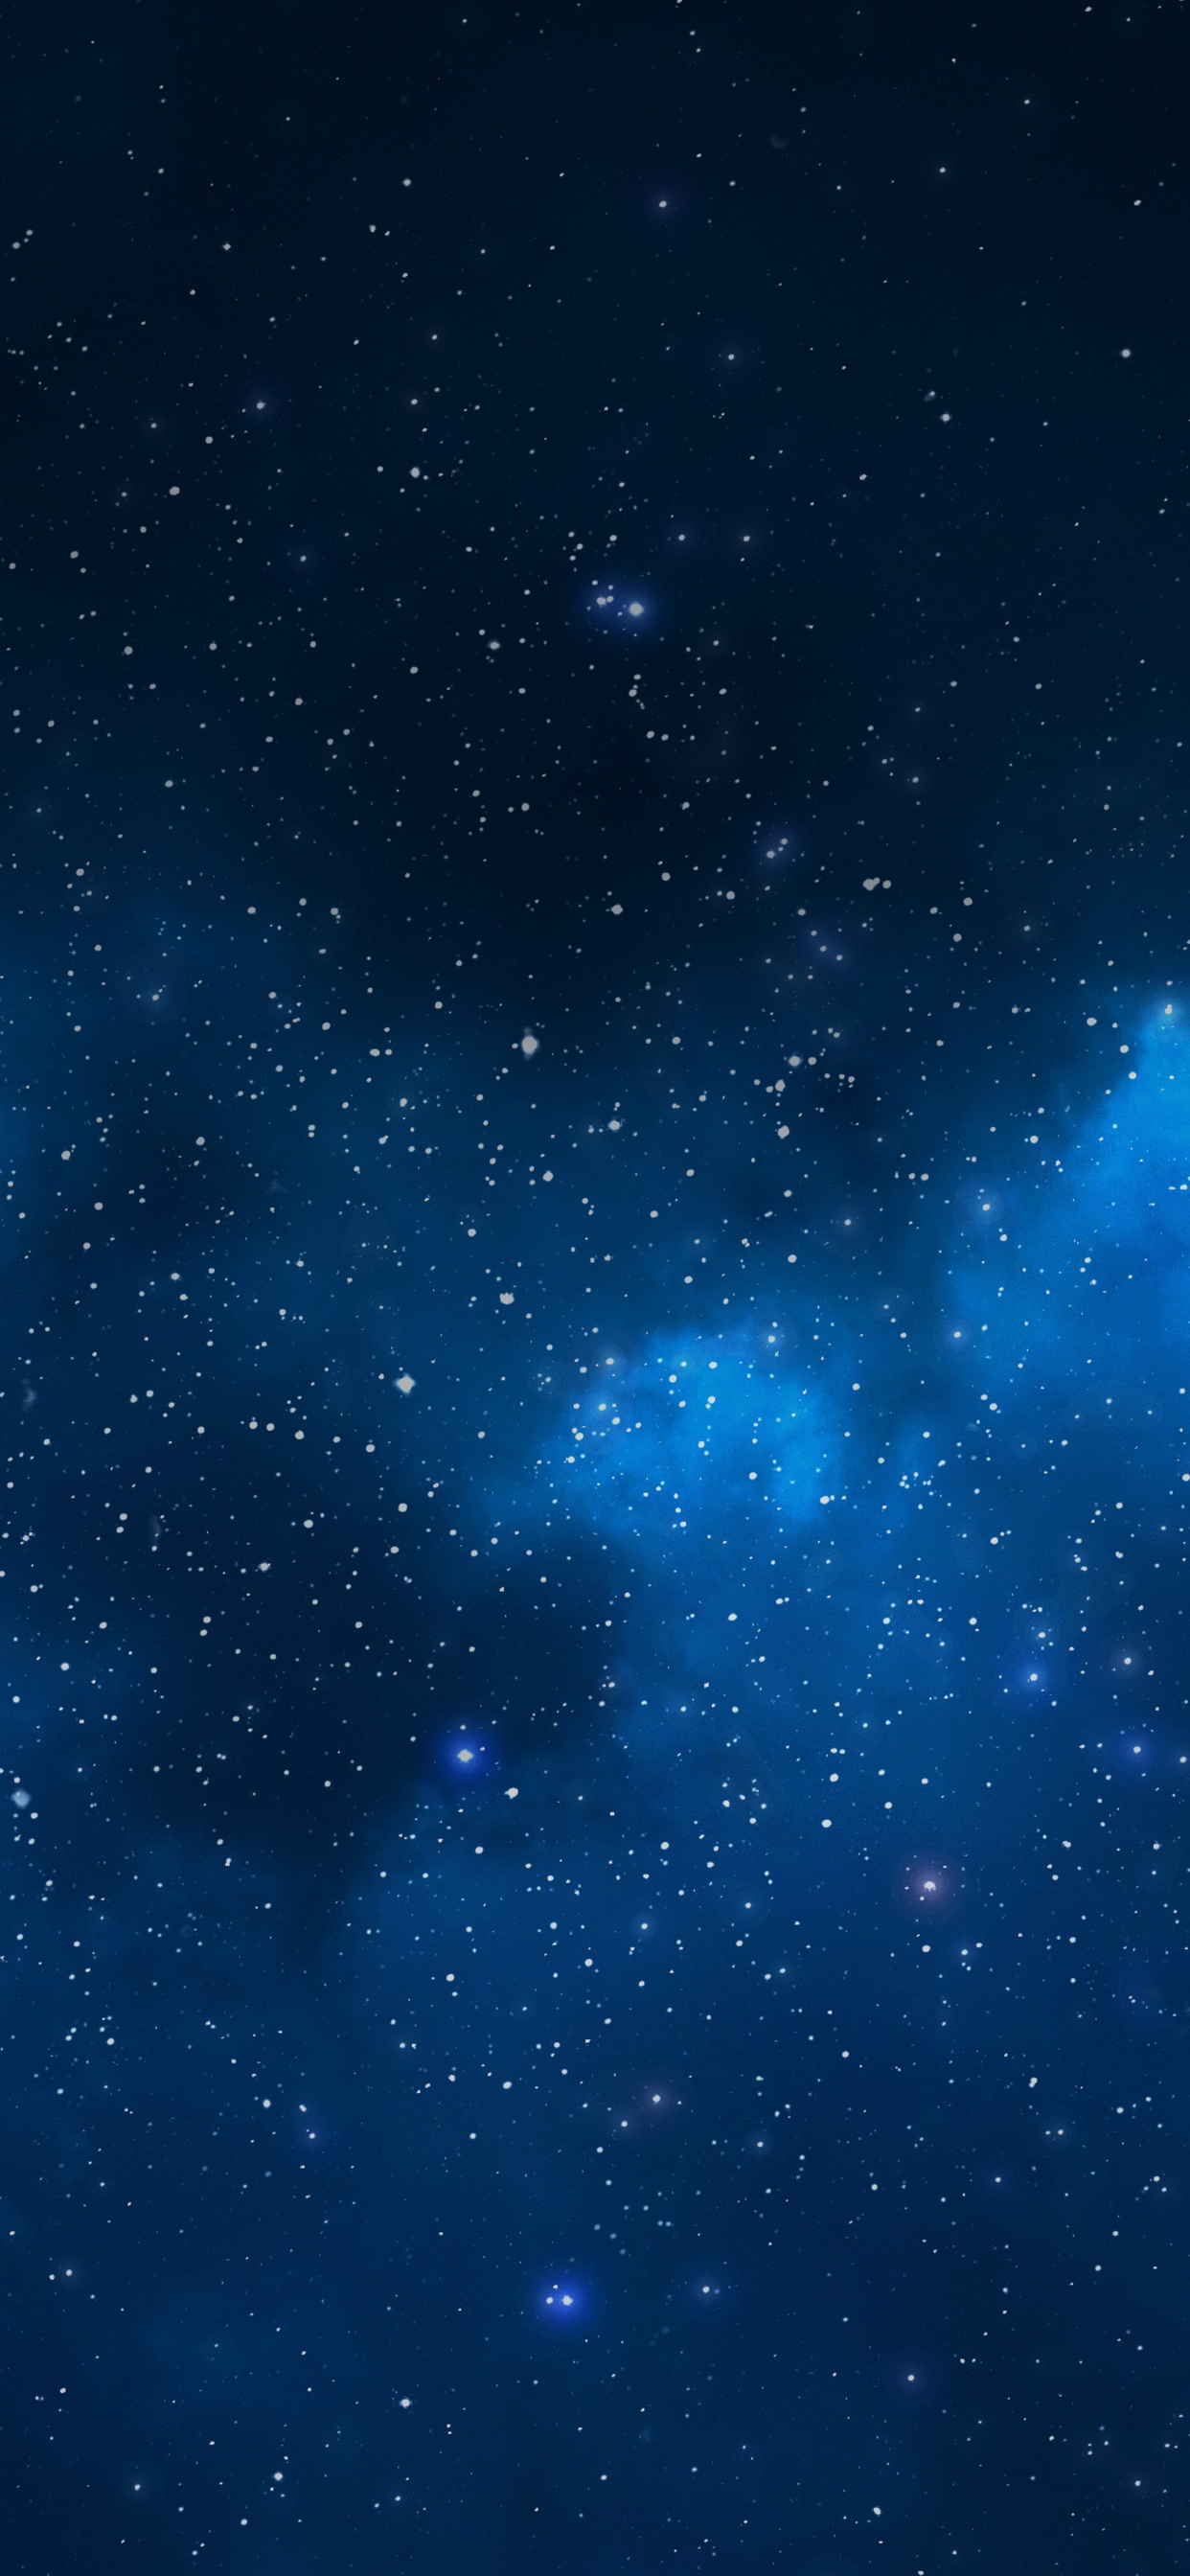 Blue and White Starry Night Sky. Wallpaper in 1242x2688 Resolution